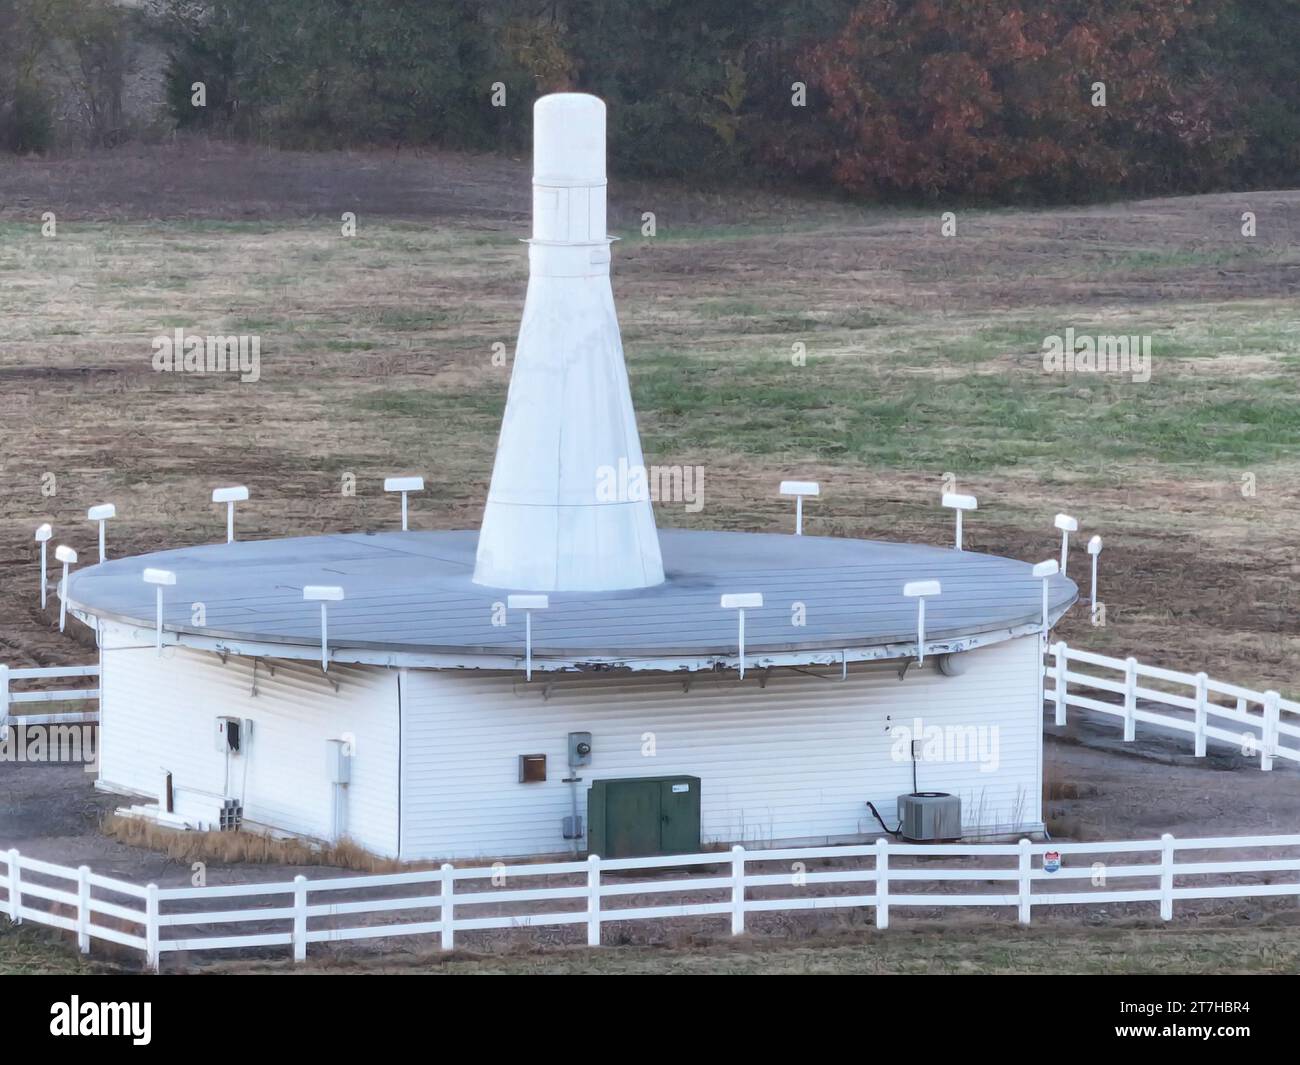 The Fort Smith VORTAC avionics station in Crawford County in Arkansas Stock Photo